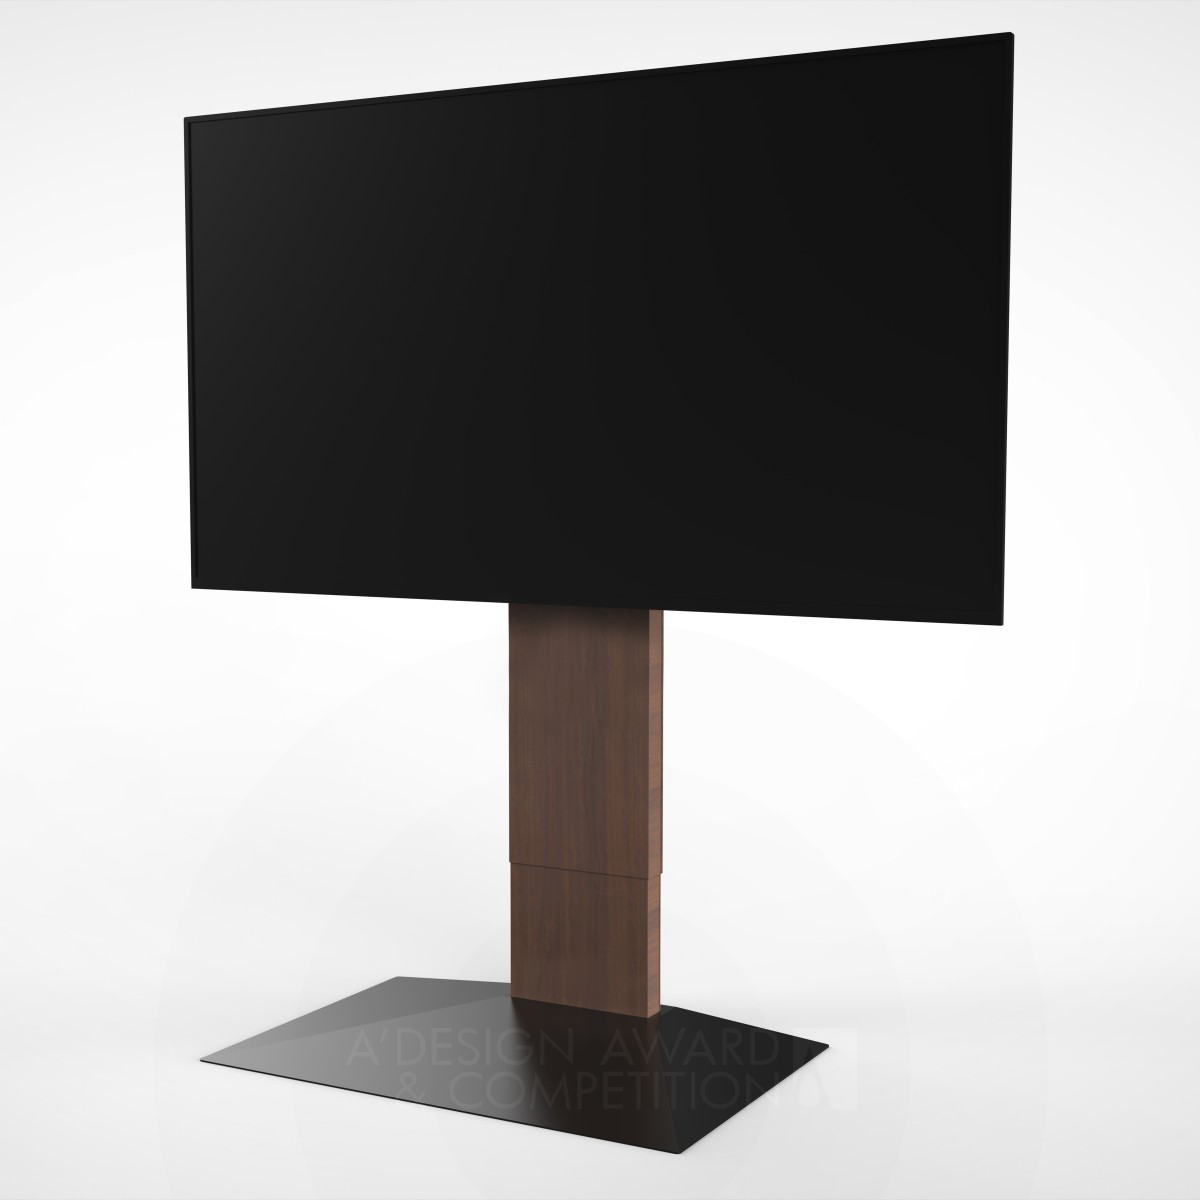 Wall V4 TV Stand